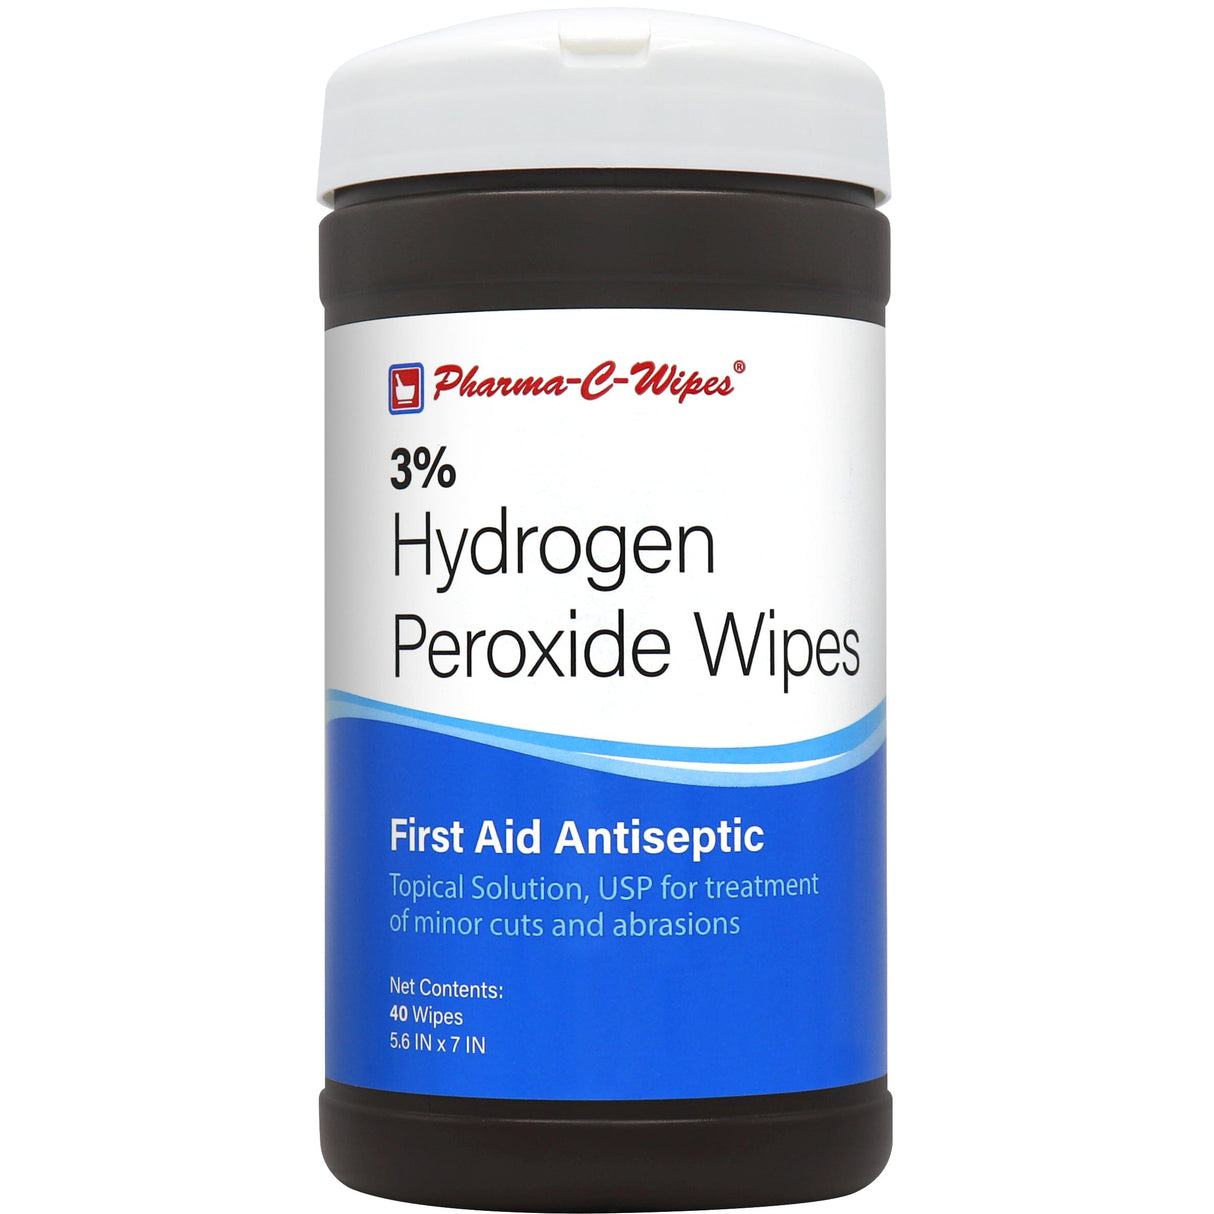 Image of Kleen Test Pharma-C-Wipes™ 3% Hydrogen Peroxide First Aid Wipe